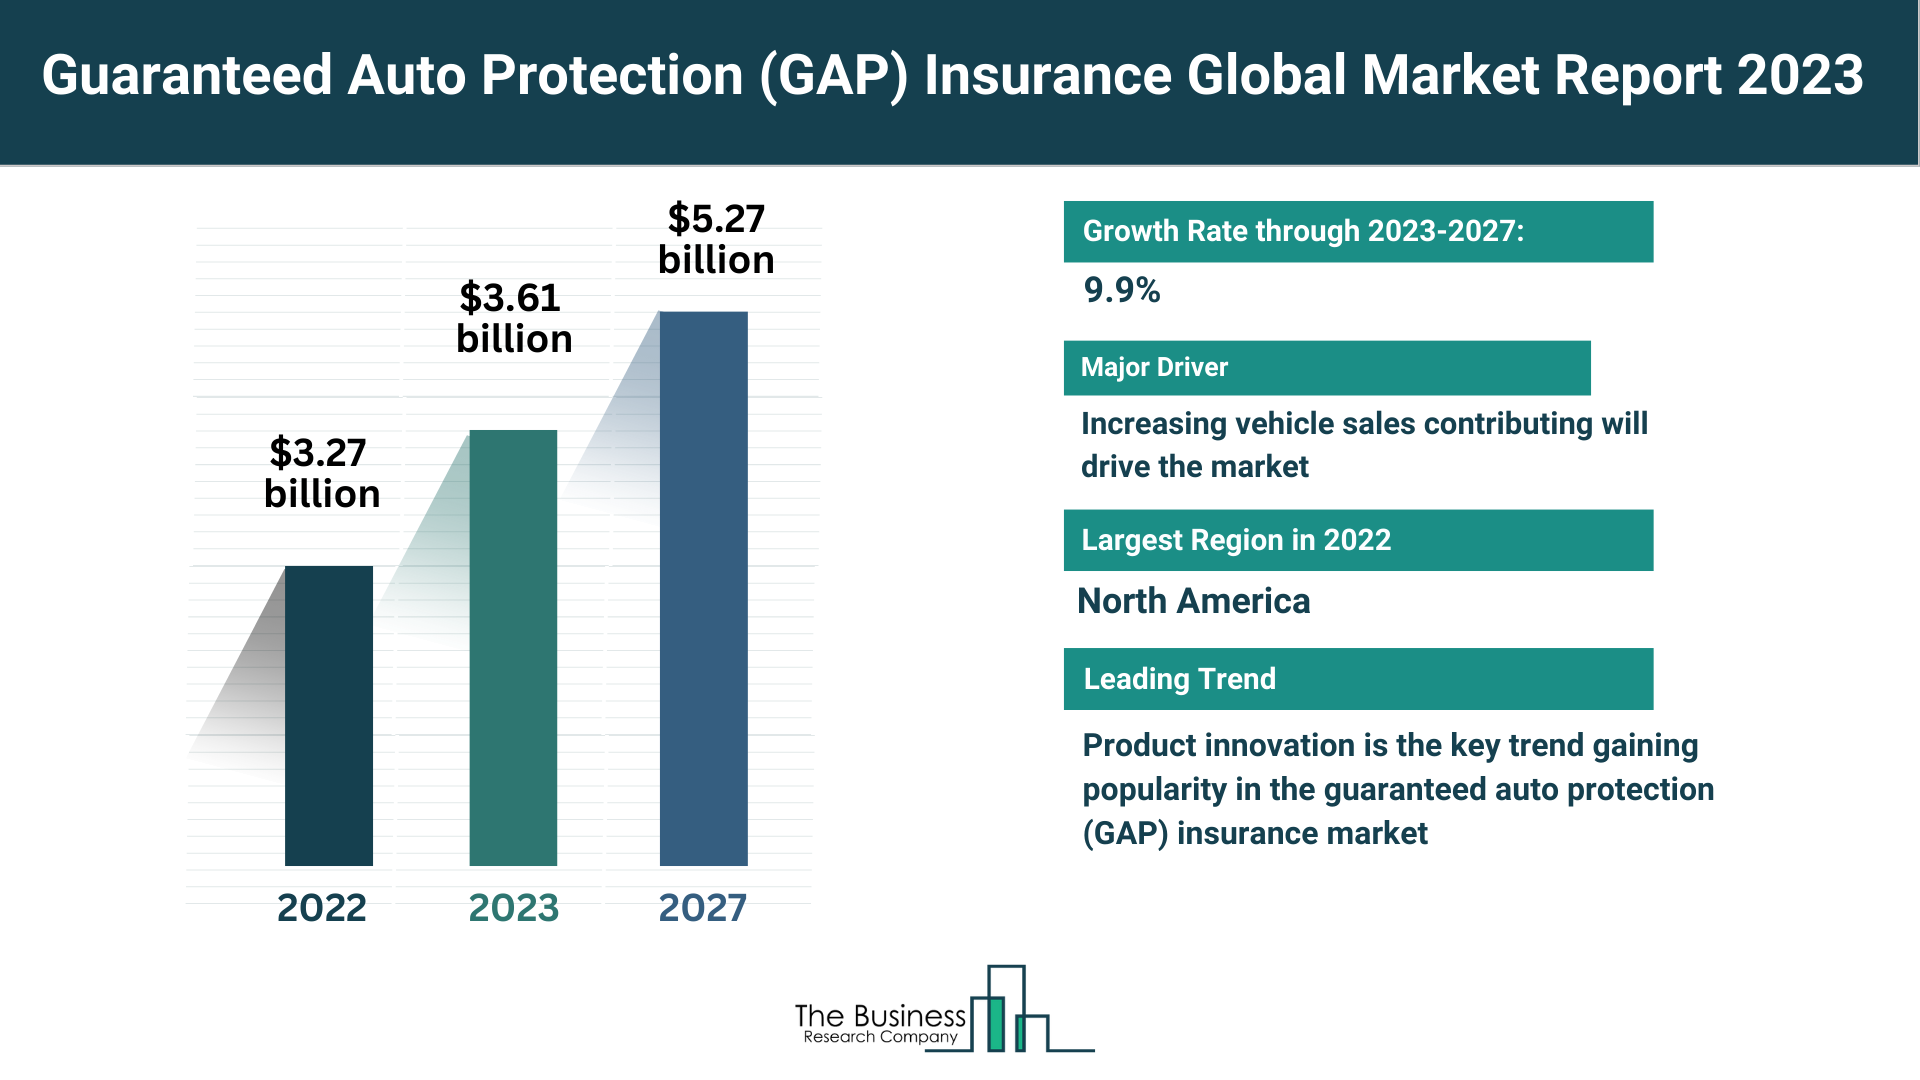 5 Key Takeaways From The Guaranteed Auto Protection (GAP) Insurance Market Report 2023